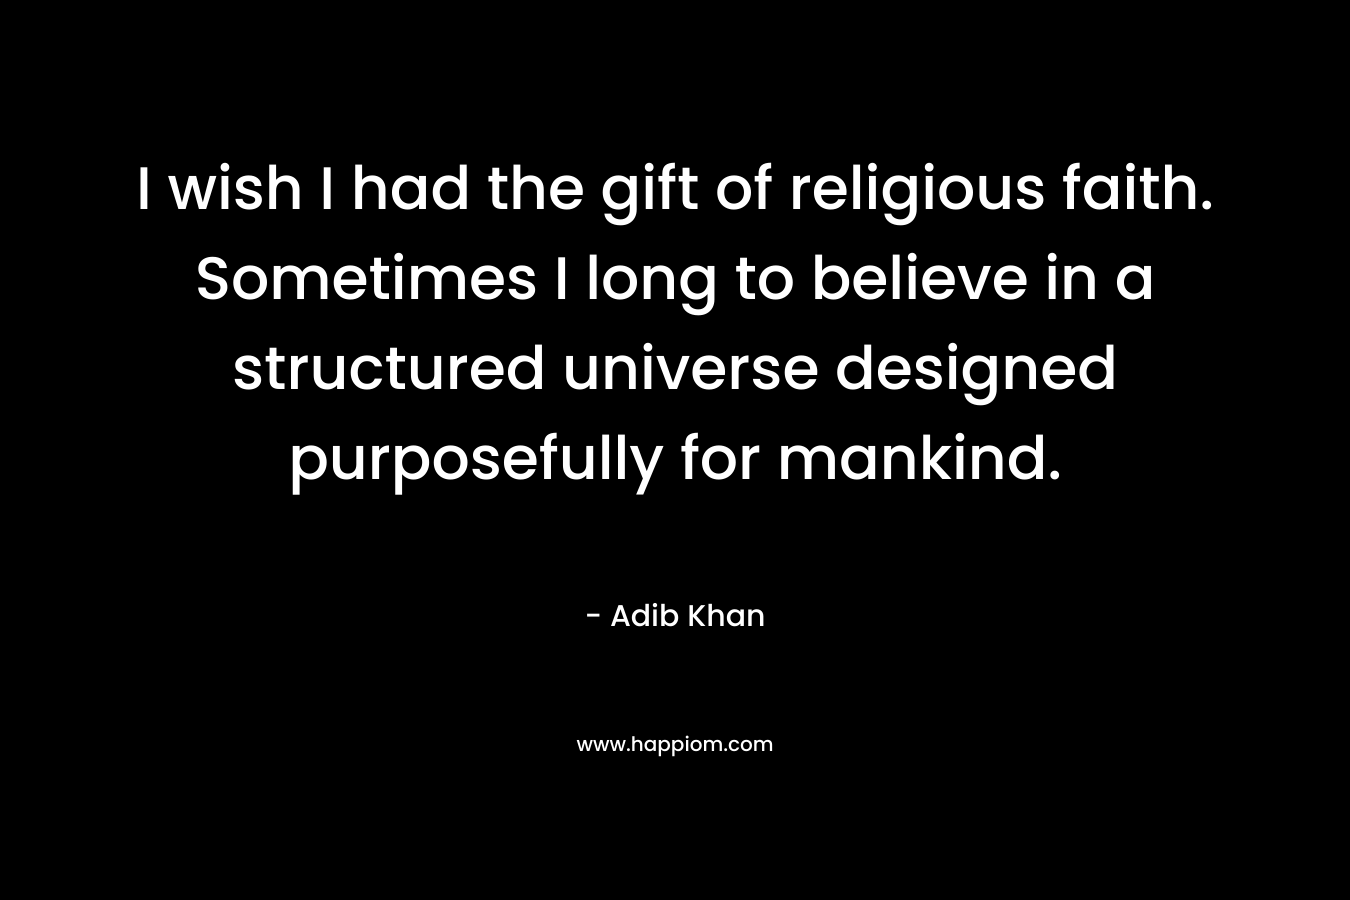 I wish I had the gift of religious faith. Sometimes I long to believe in a structured universe designed purposefully for mankind. – Adib Khan